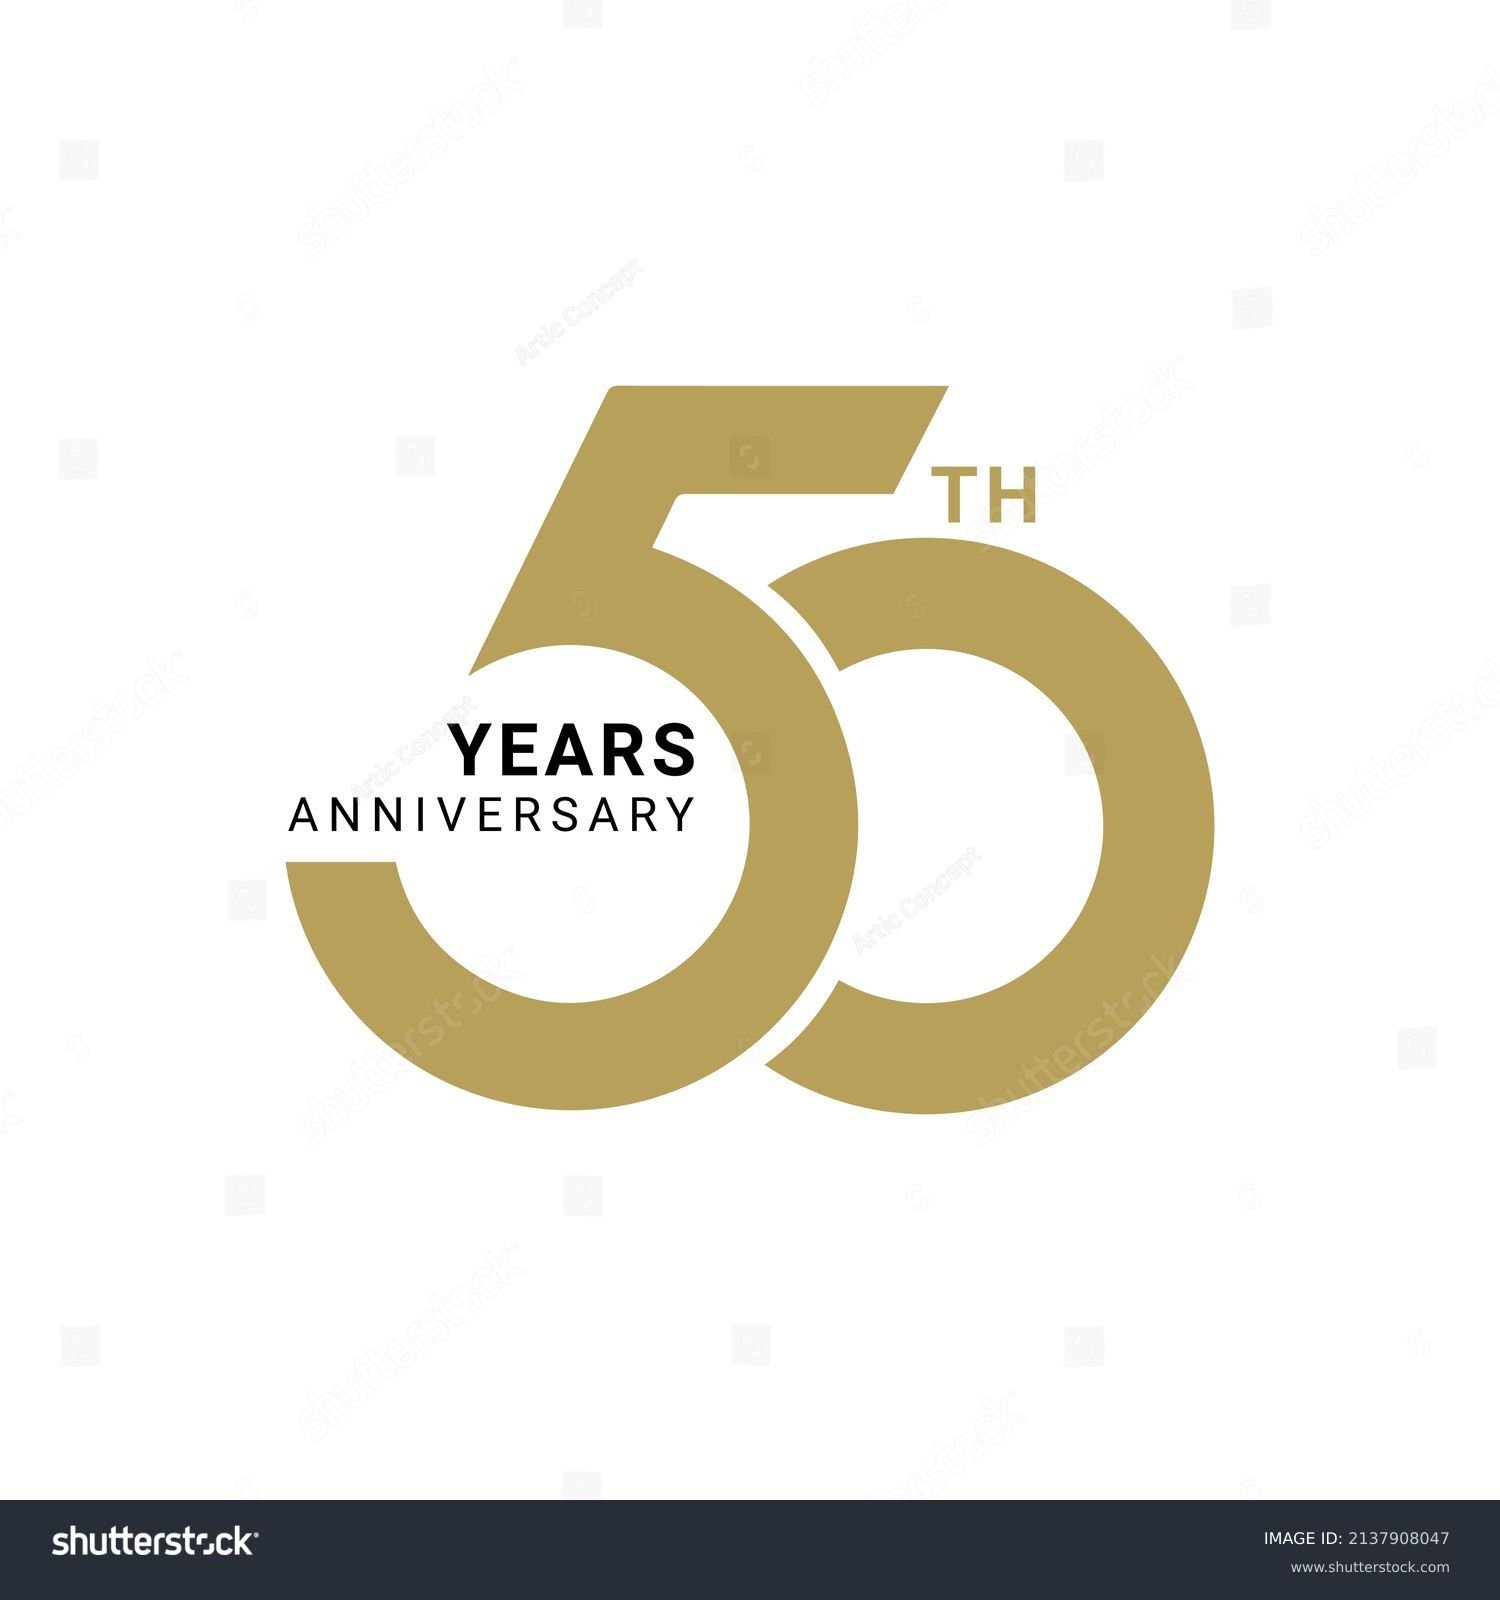 SVG of 50 Year Anniversary Logo, Golden Color, Vector Template Design element for birthday, invitation, wedding, jubilee and greeting card illustration. svg